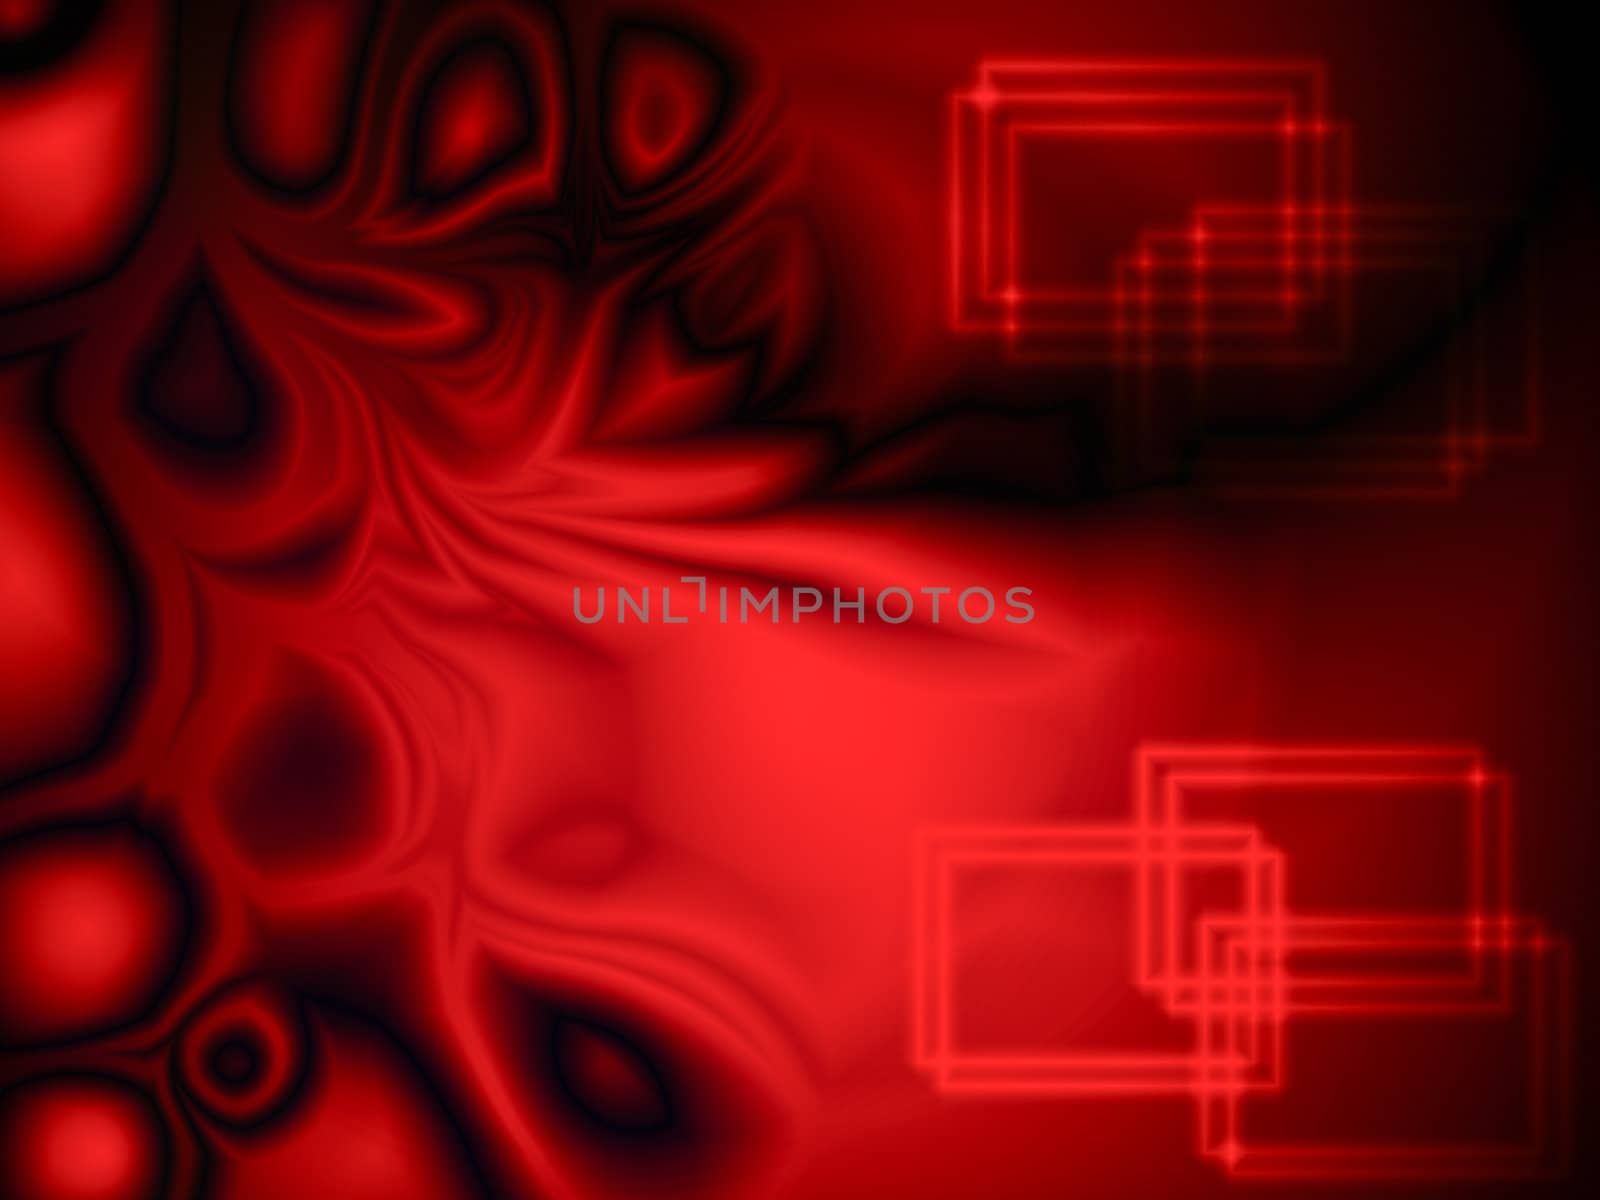 Red plasma and rectangle shapes background